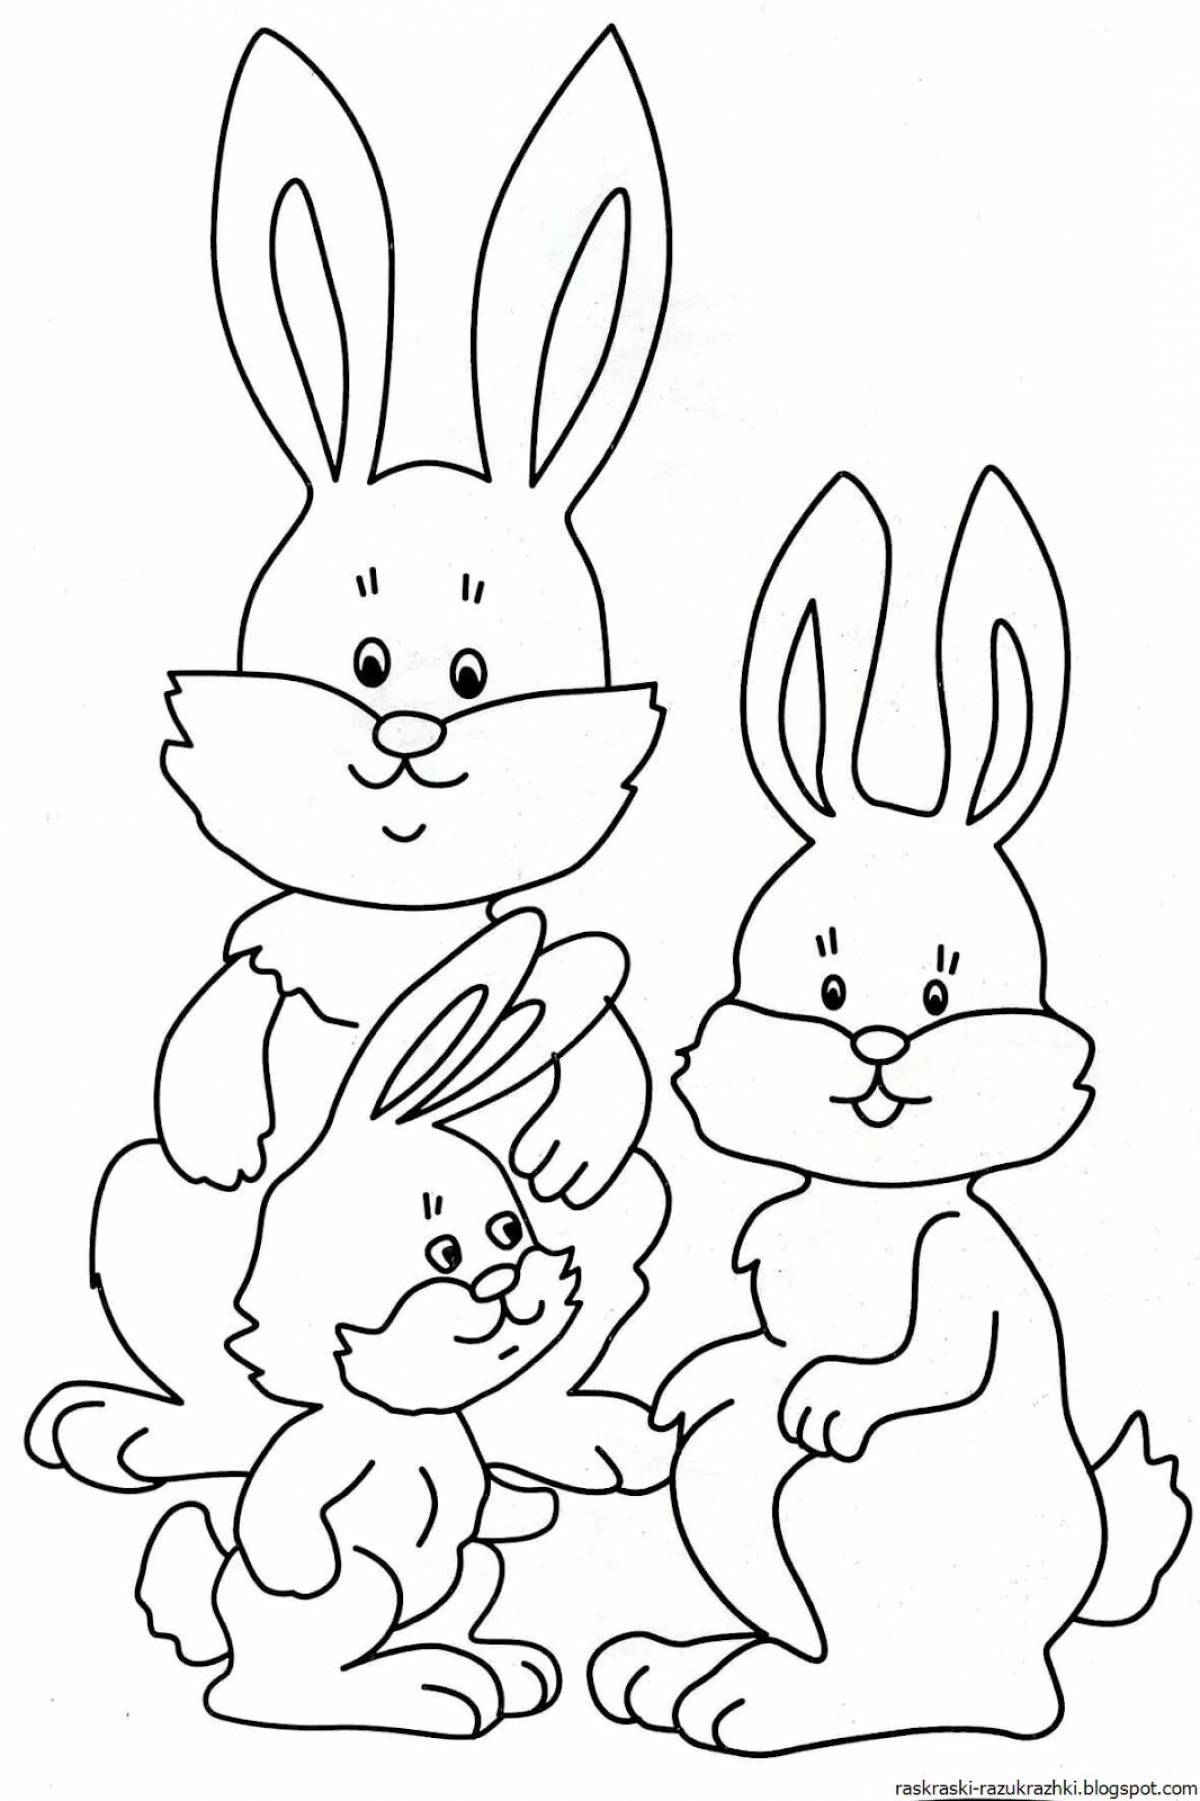 Colourful adorable hare coloring book for kids